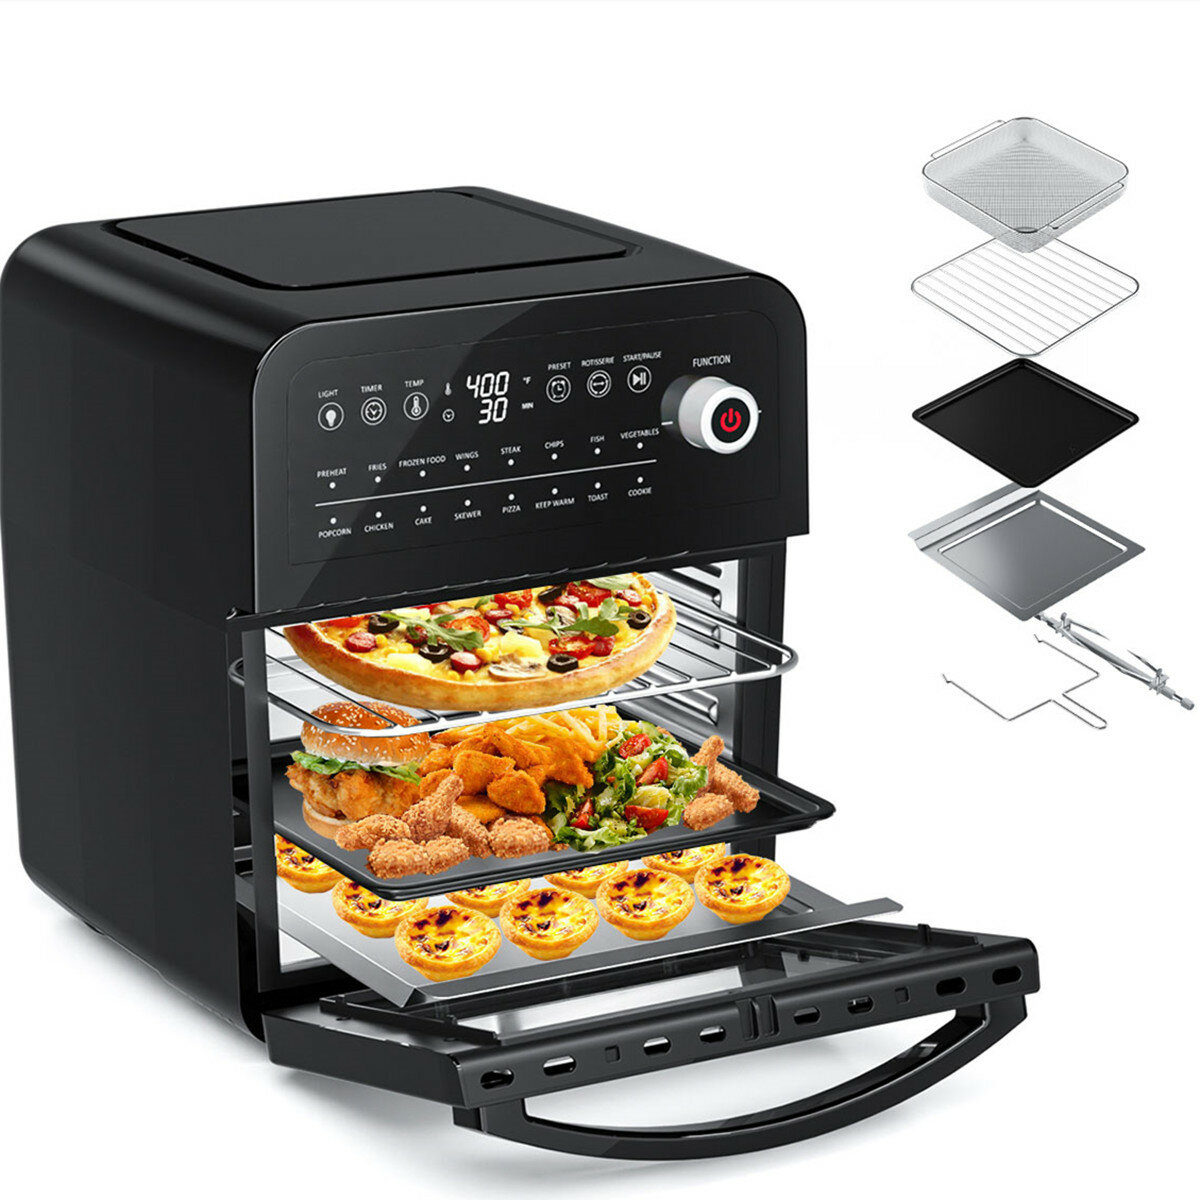 best price,osmond,in,air,fryer,toaster,oven,12l,usa,discount